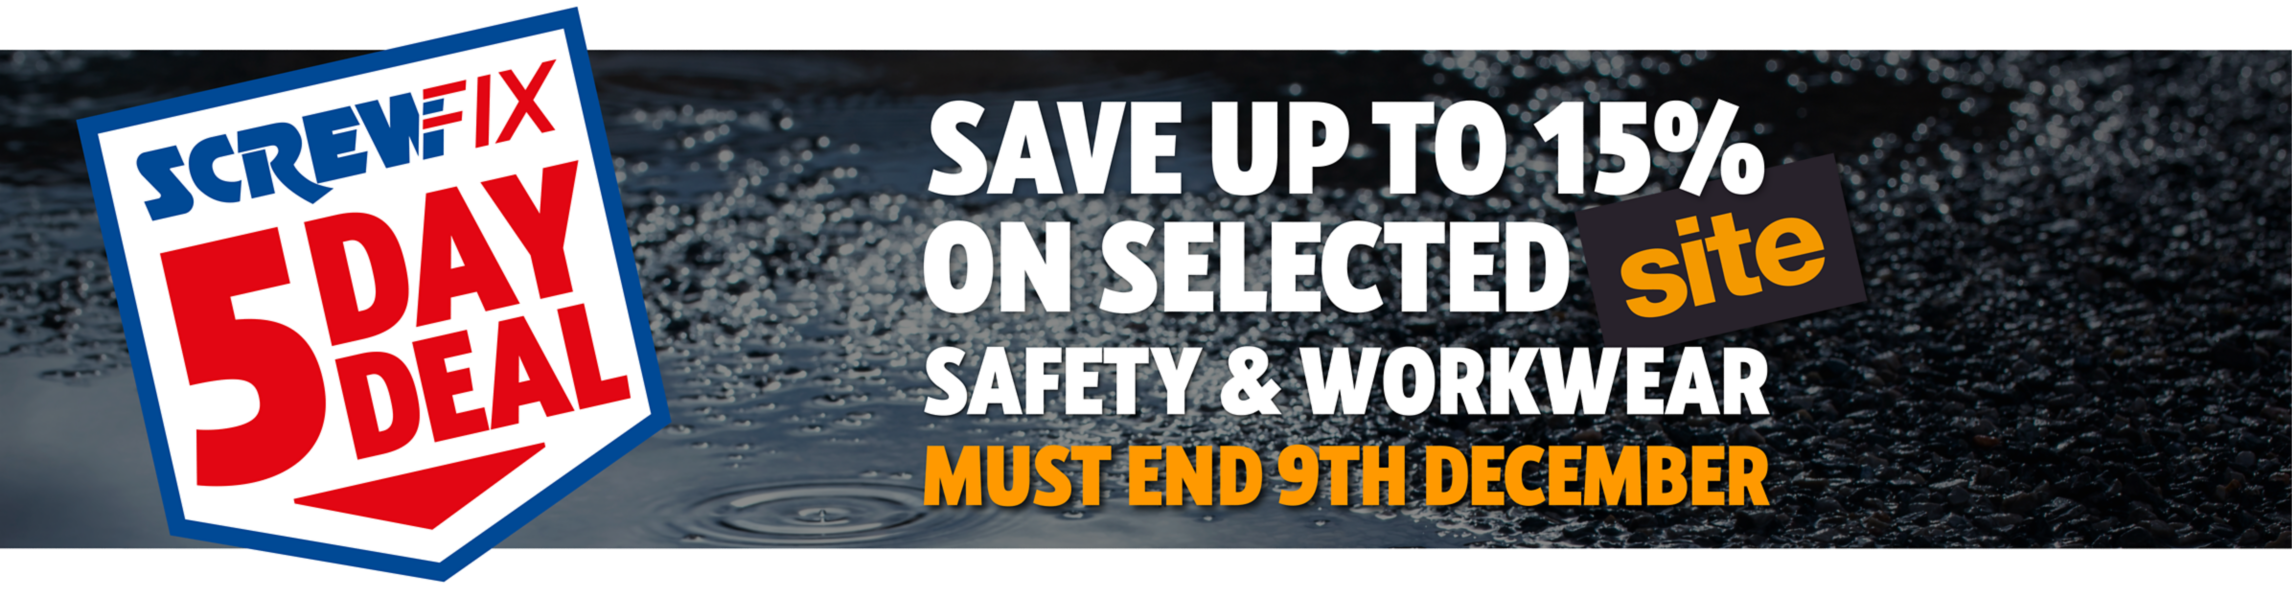 Save up to 15% on Selected Site Workwear